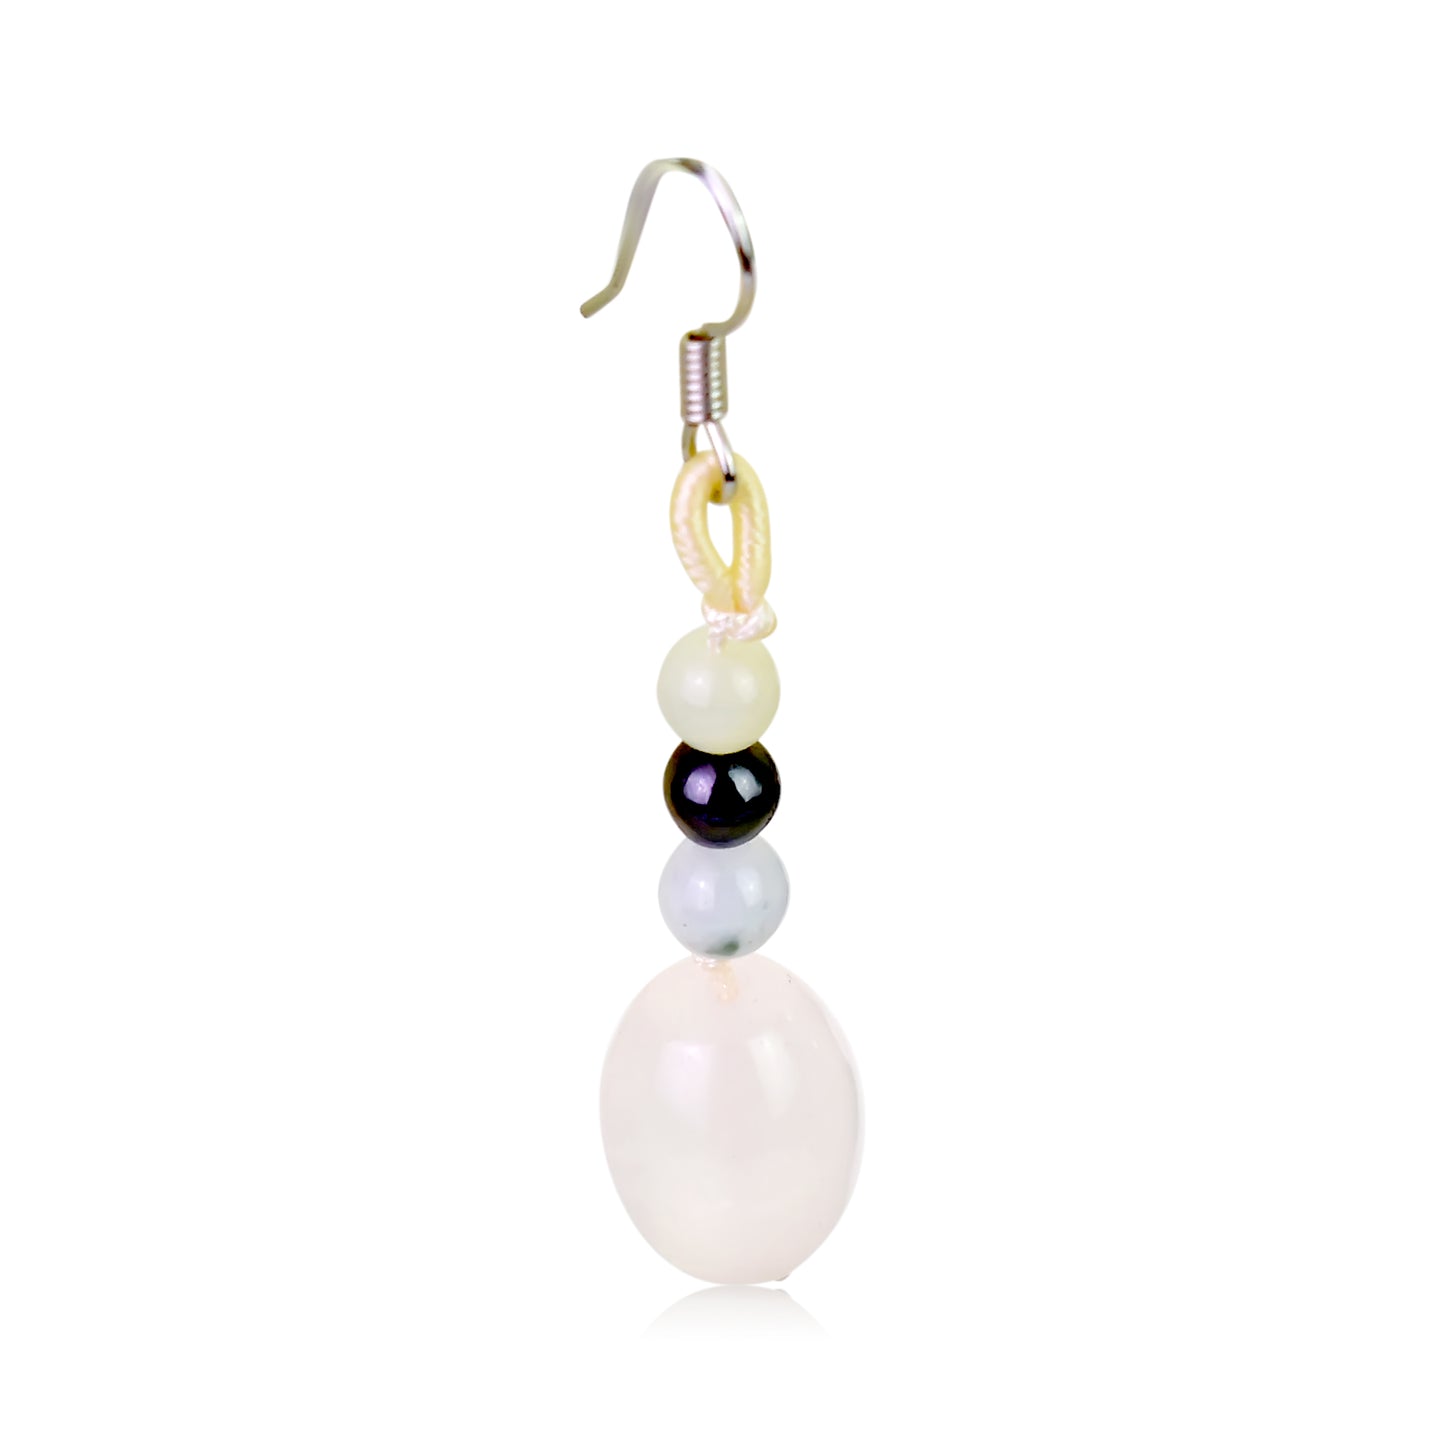 Stand Out with the Beautiful Elegant Oblong Rose Quartz Earrings made with White Cord